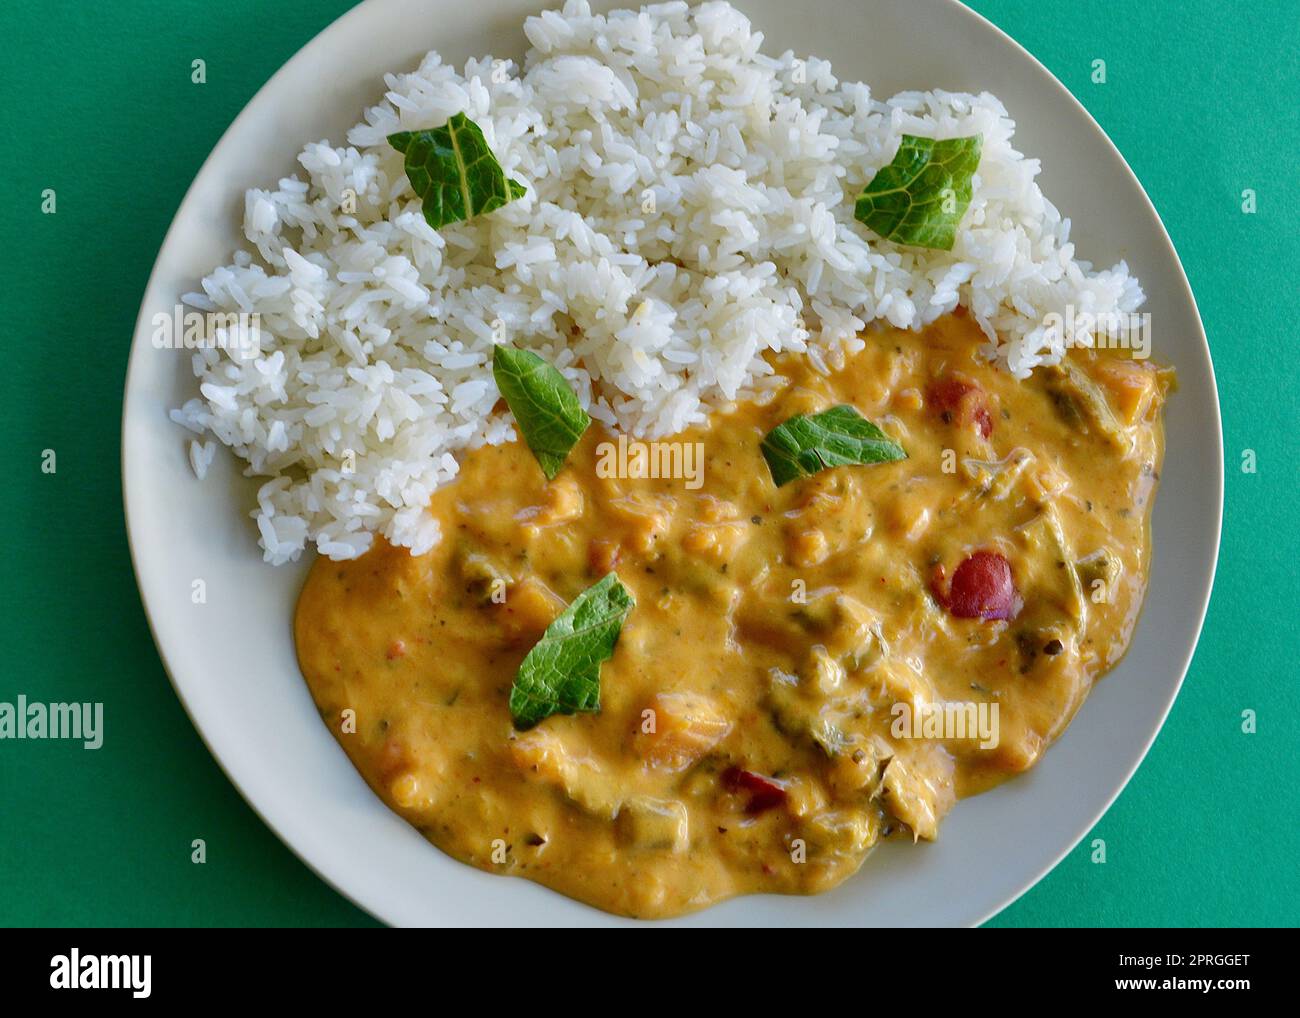 Thai red vegetable curry and rice Stock Photo